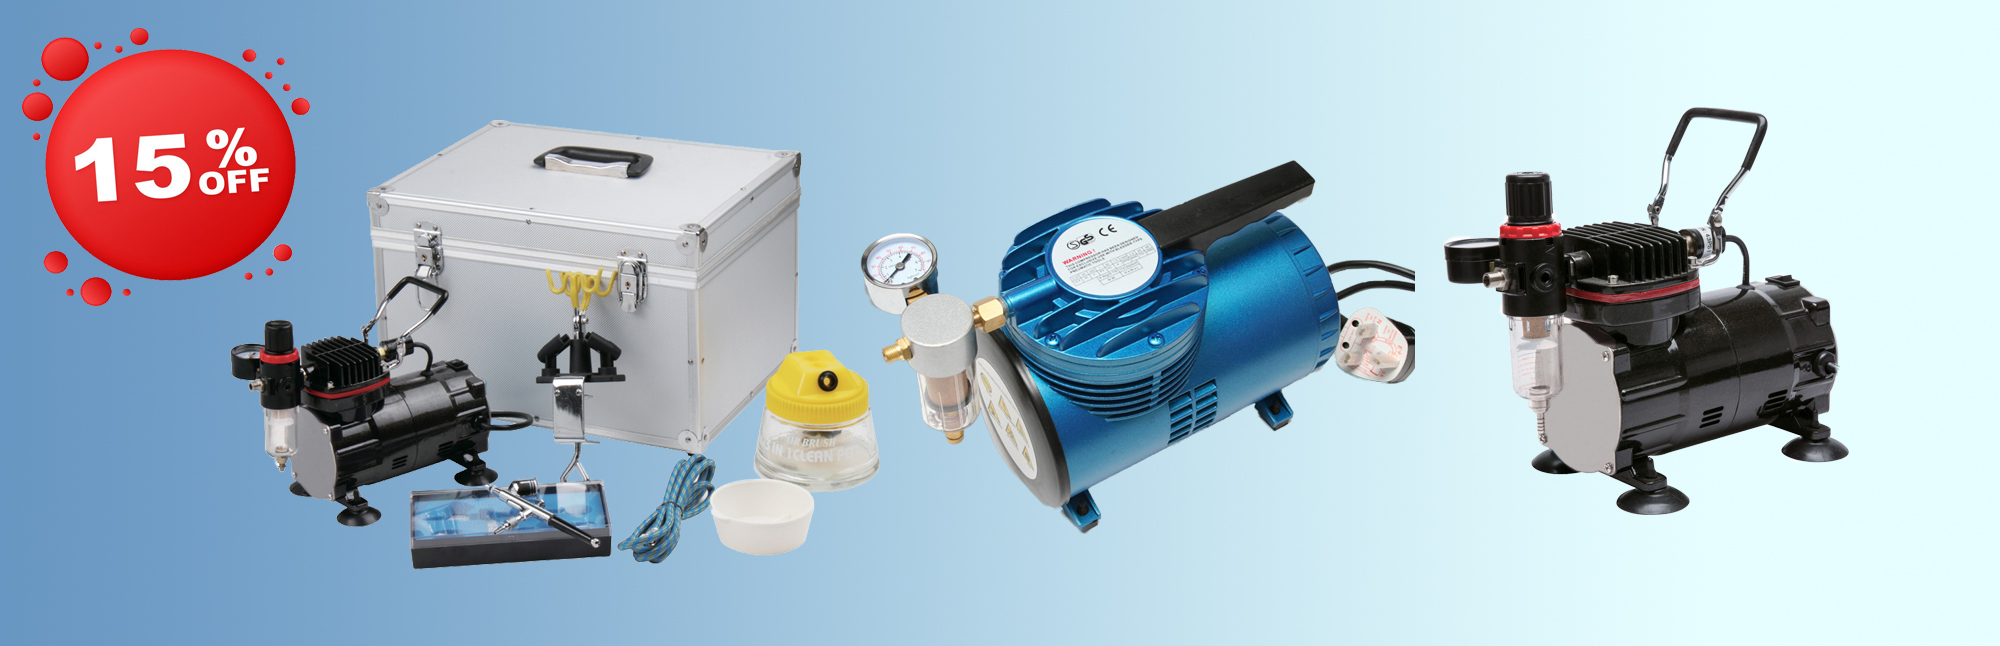 15% OFF AIRBRUSH COMPRESSORS